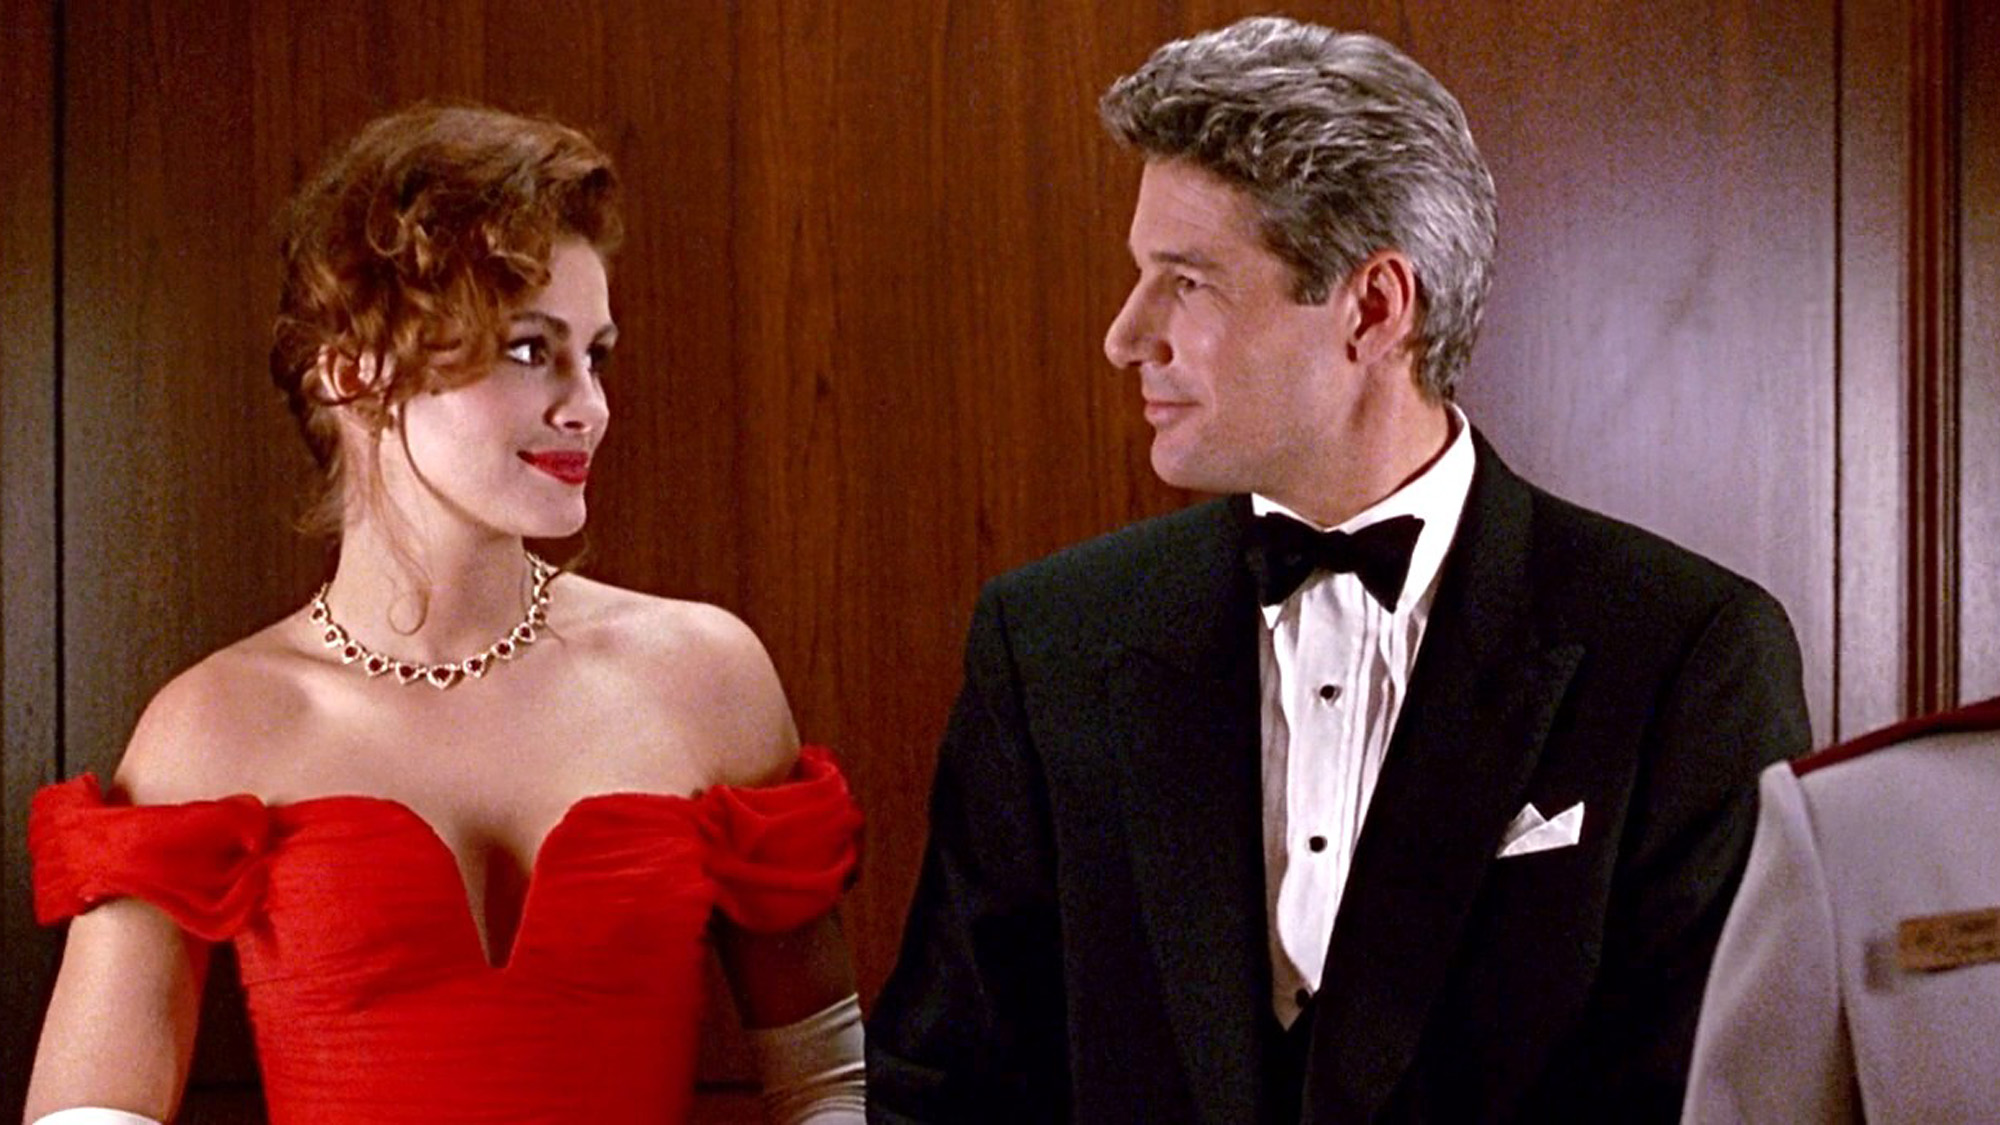 Movies That Would Never Get Made Today - pretty woman filme